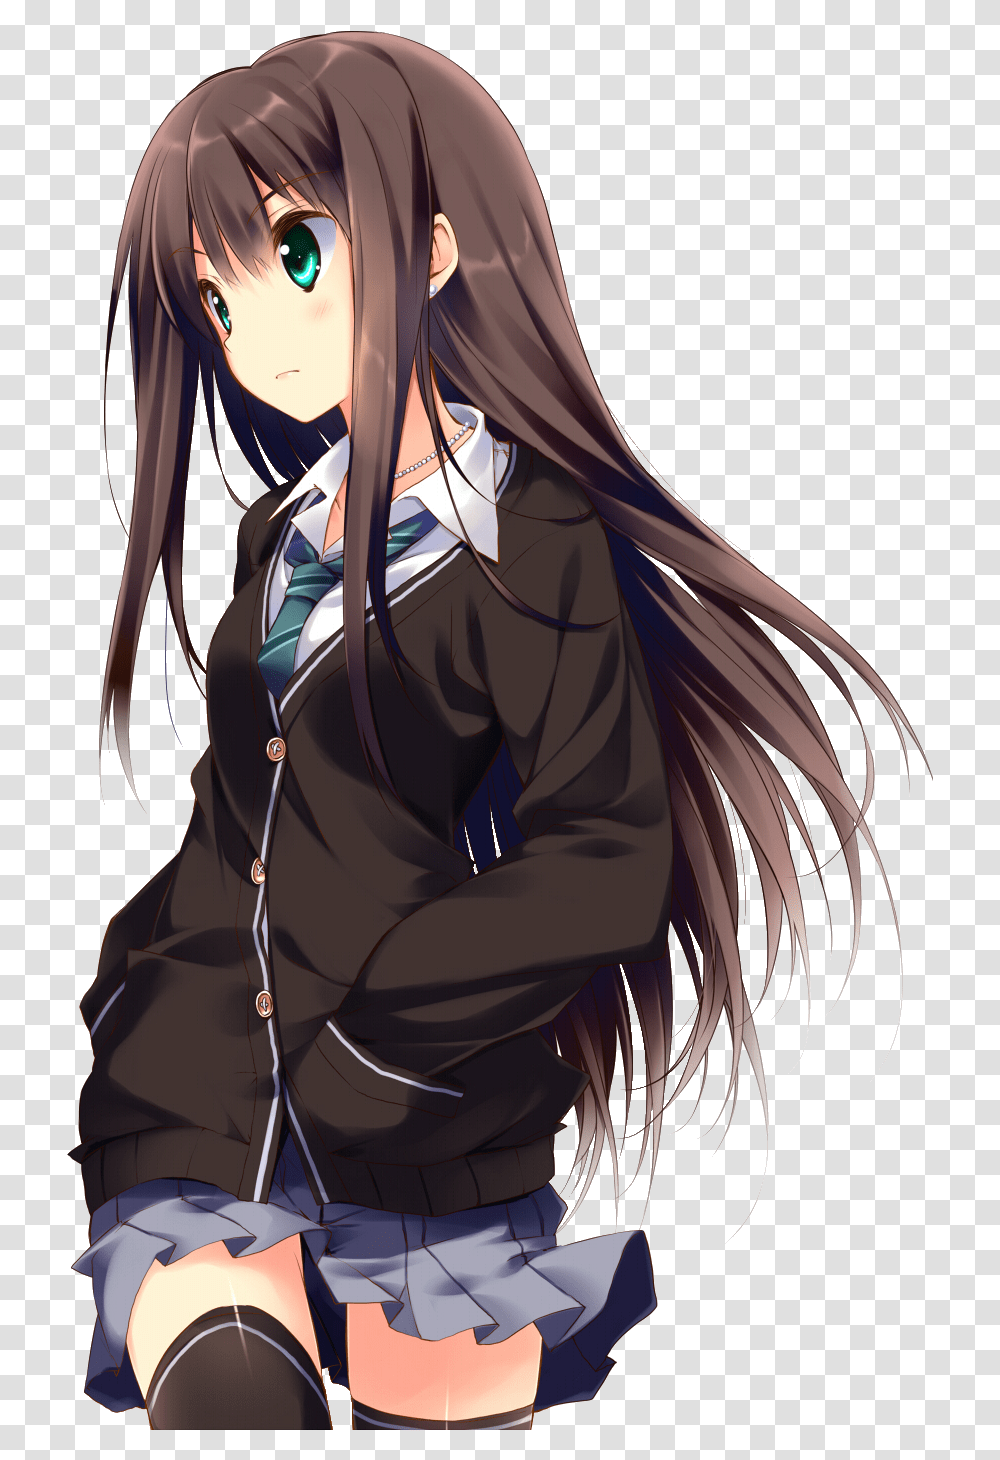 Anime Girl With Brown Hair And Blue Eyes Anime Girl Brown Hair Blue Eyes, Manga, Comics, Book Transparent Png